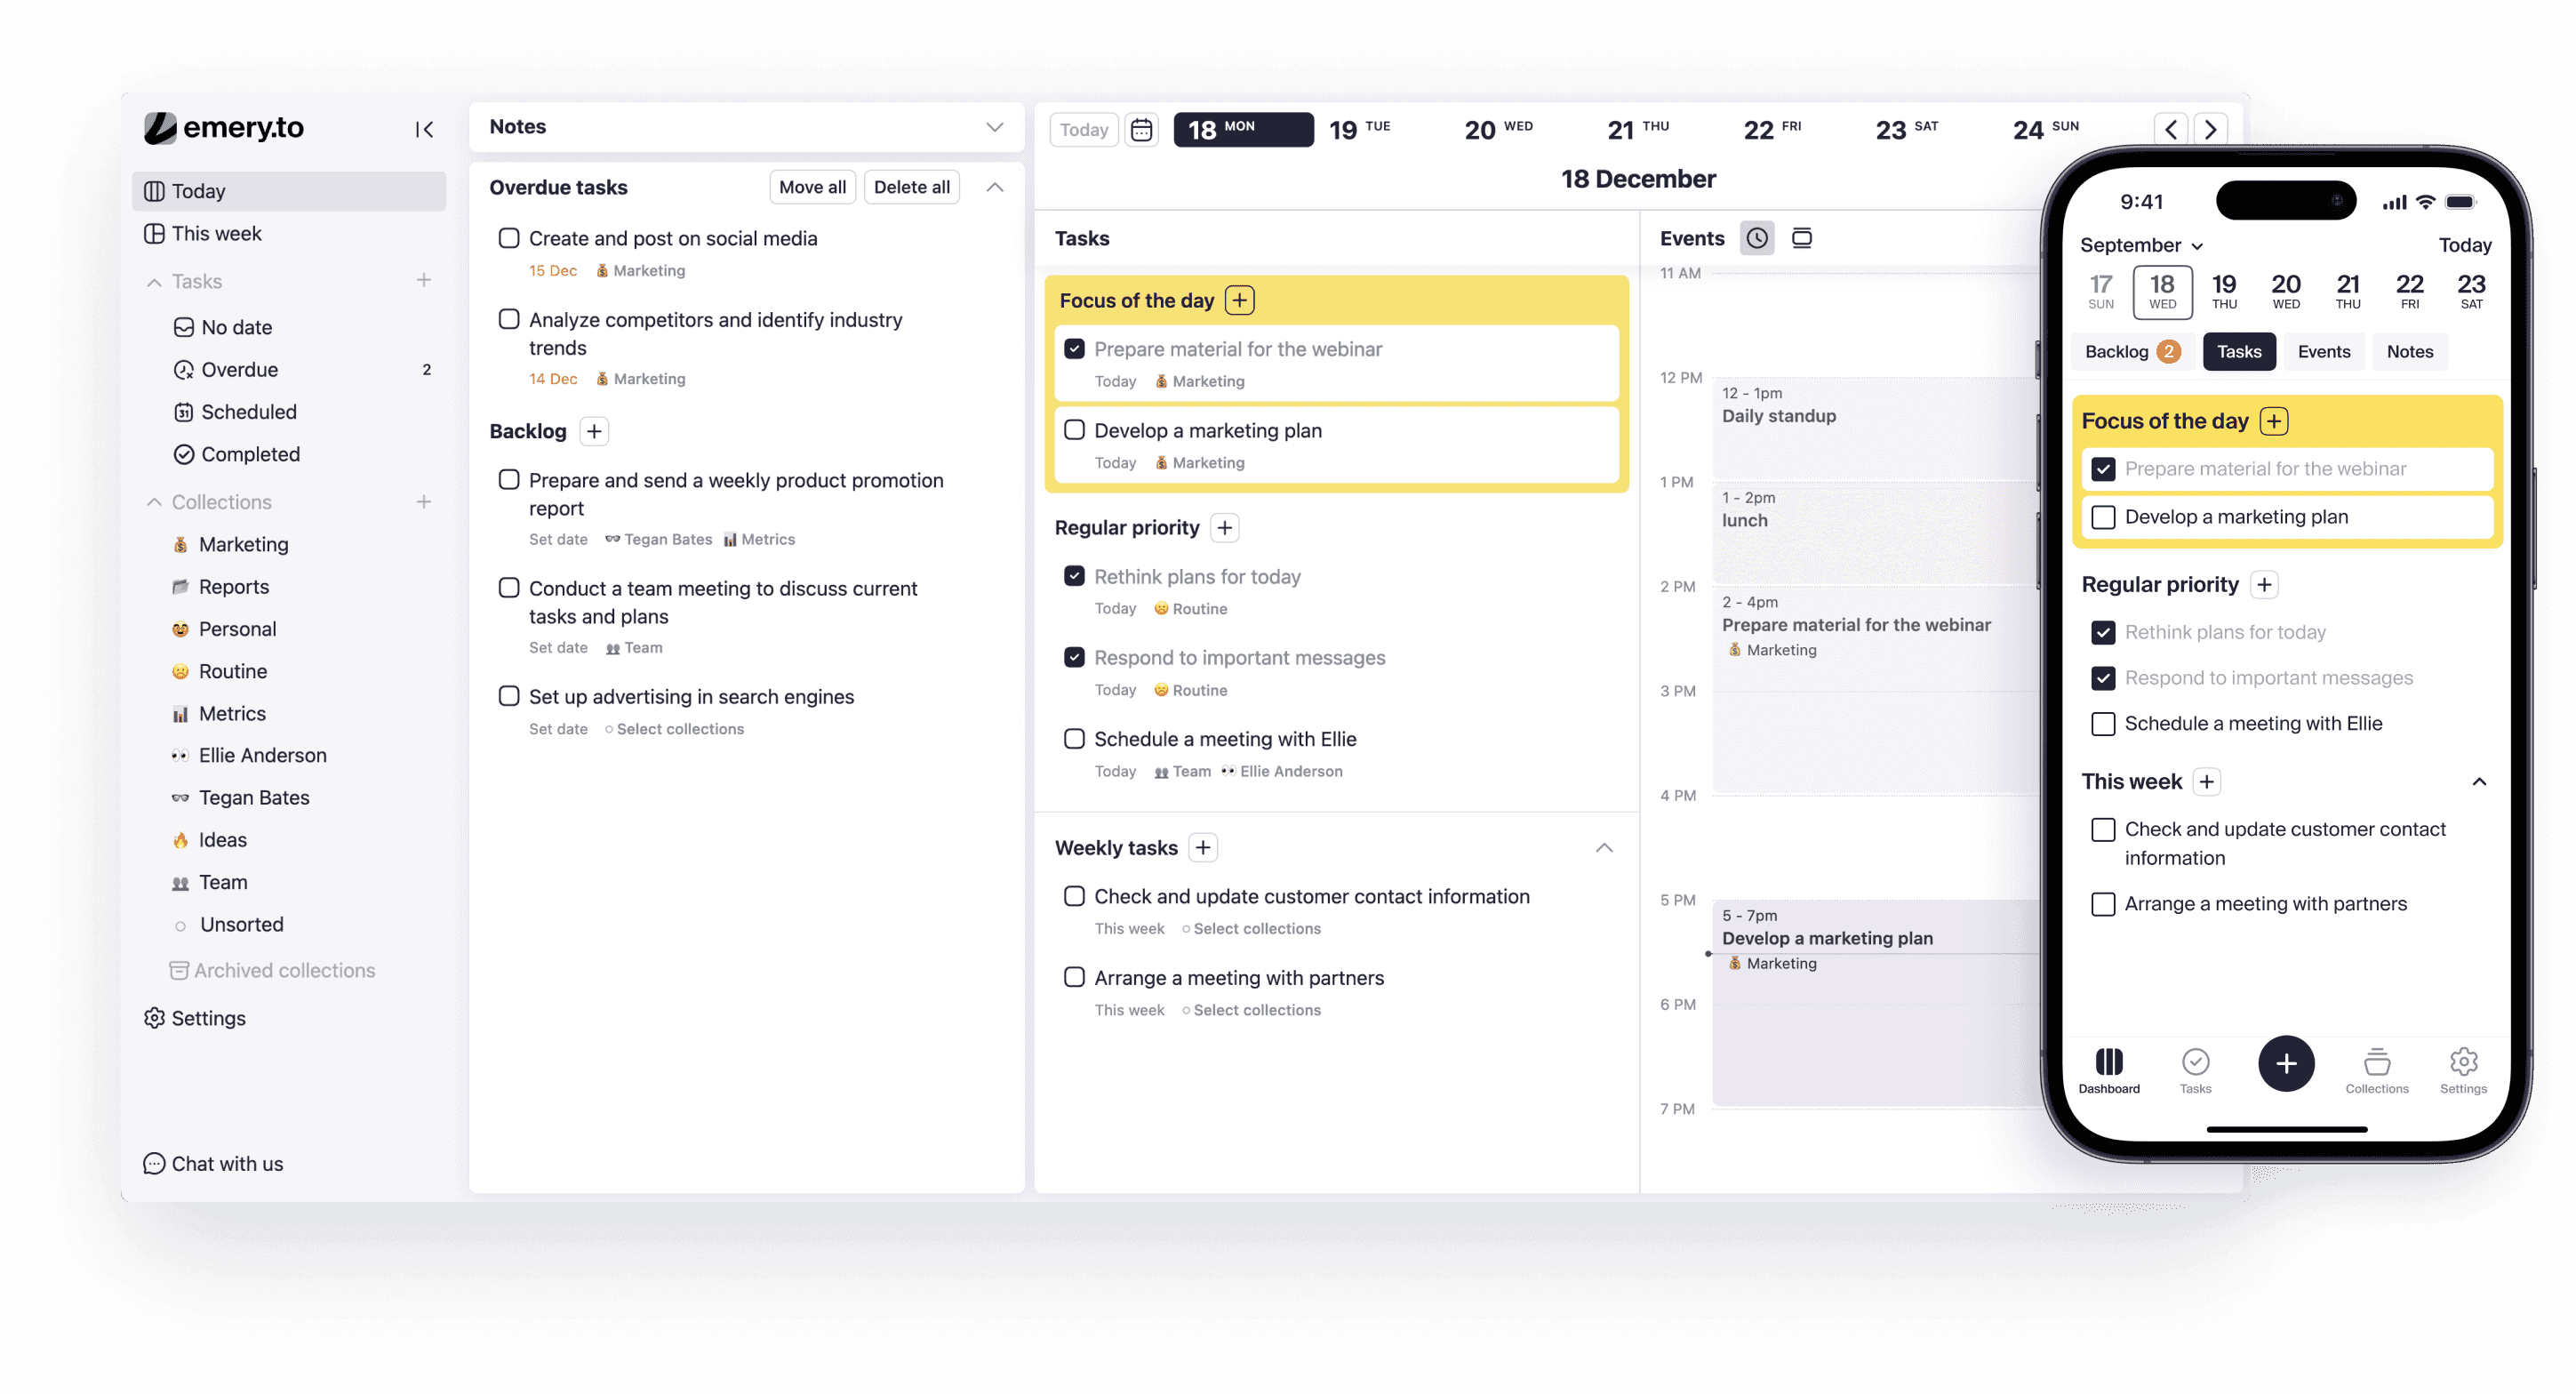 emery.to, the digital daily planner